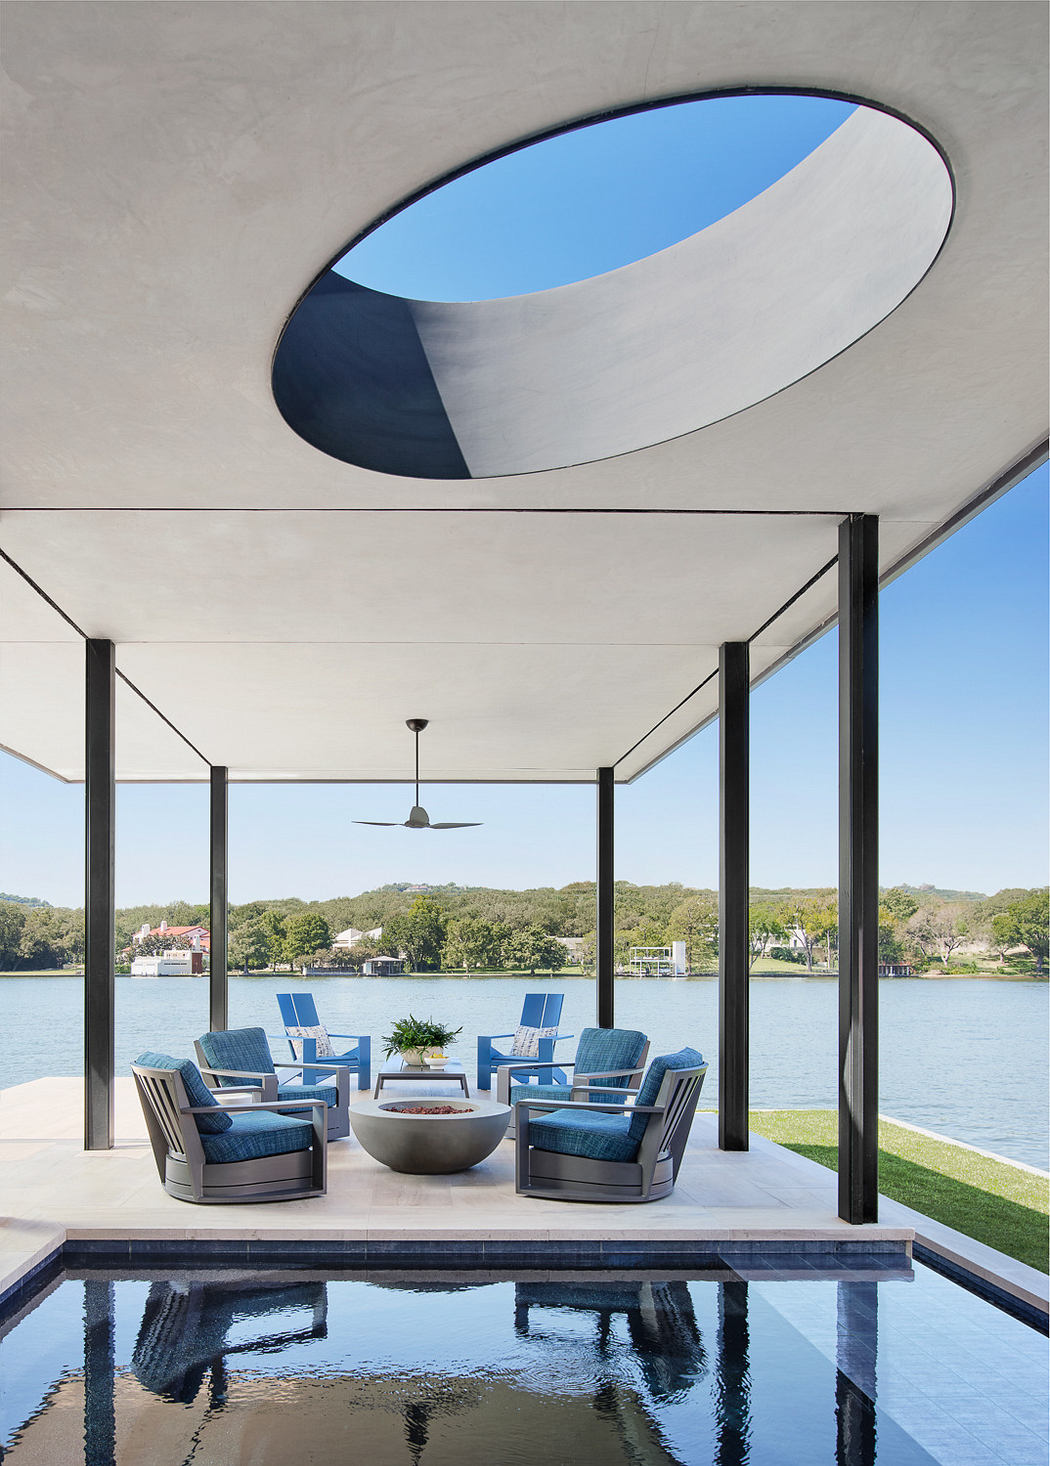 Modern lakeside patio with oval ceiling cutout, sleek furniture, and reflective water